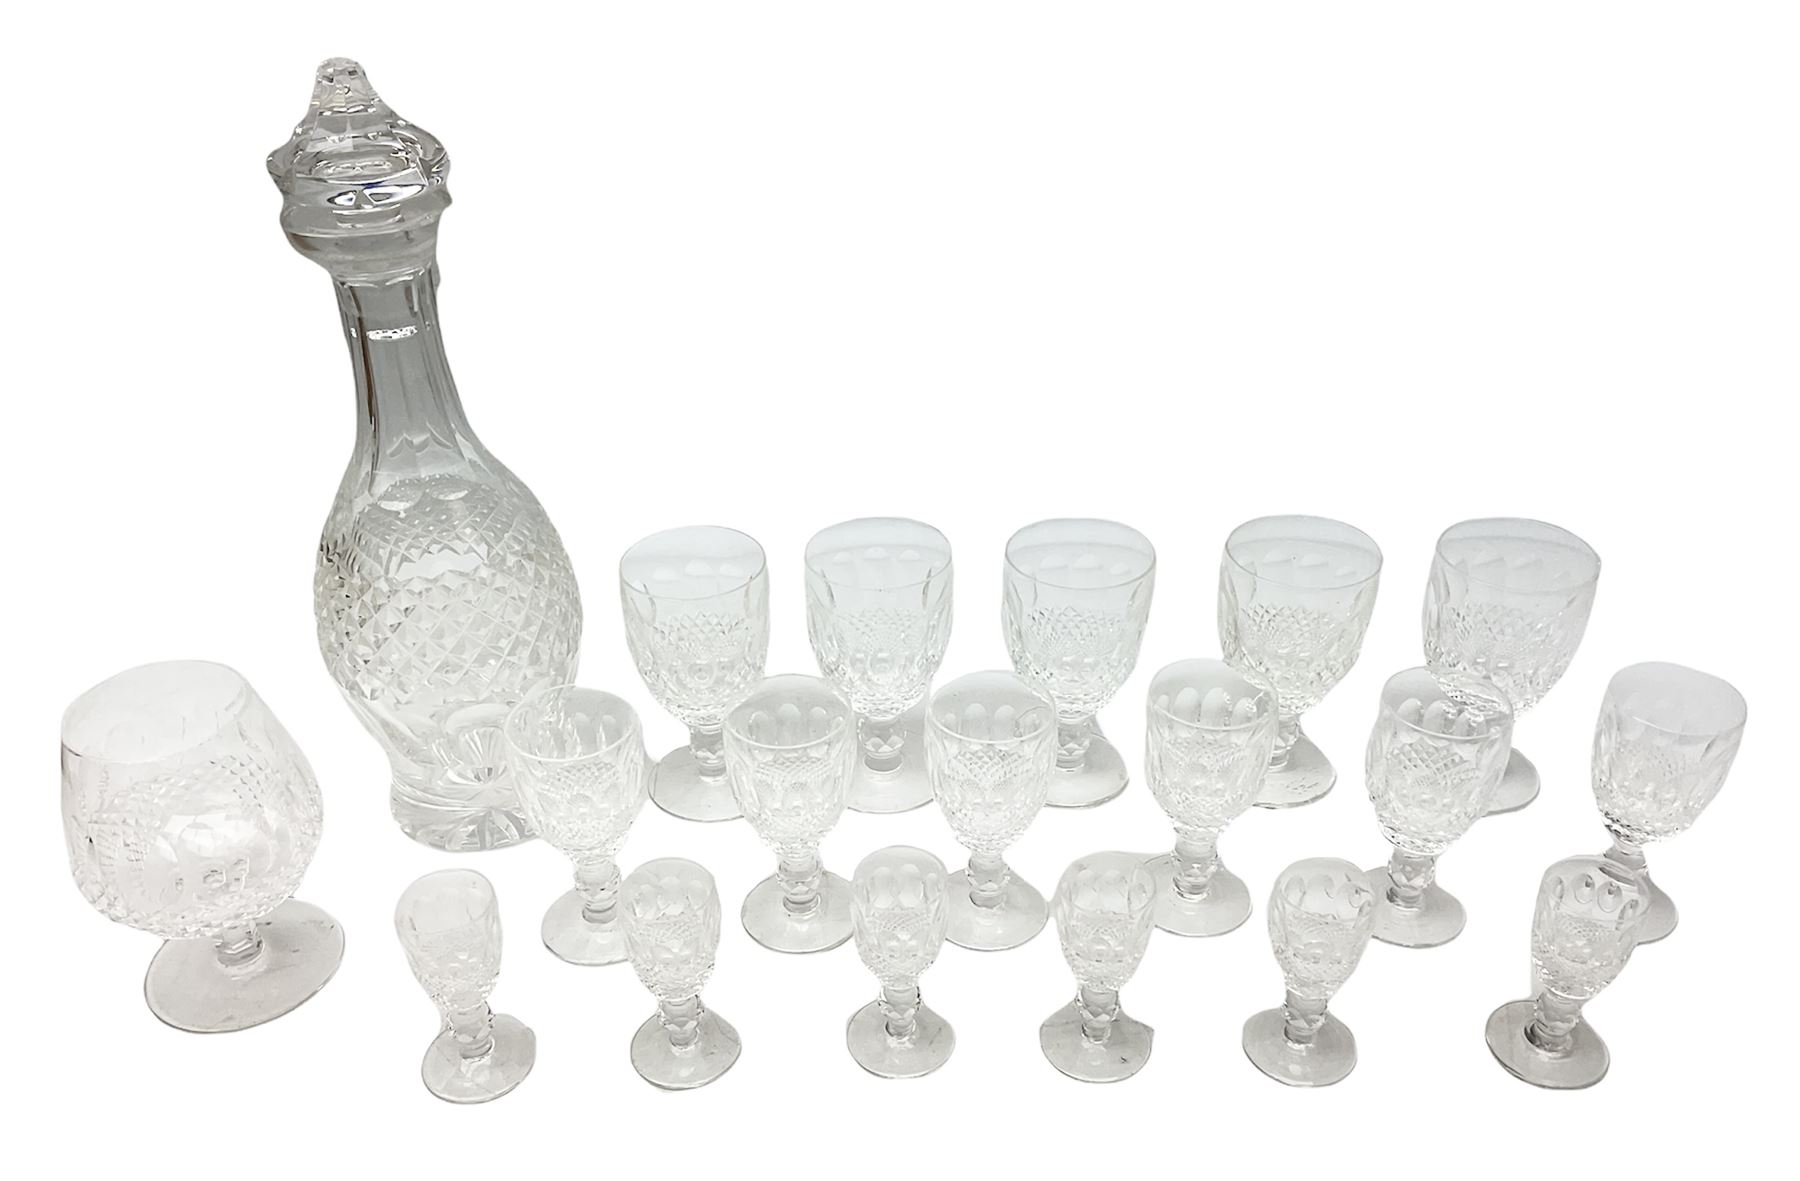 Waterford Crystal cut glass decanter in the Colleen pattern